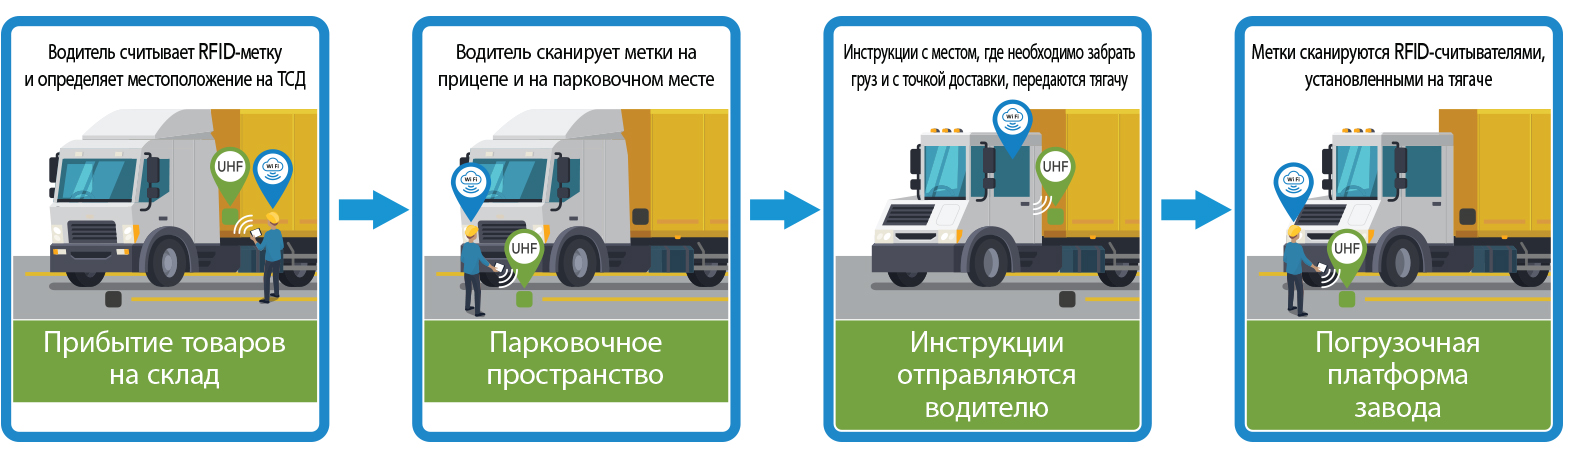 Goods arrival at site > At the parking space > Instruction sent to driver > The production plant dock